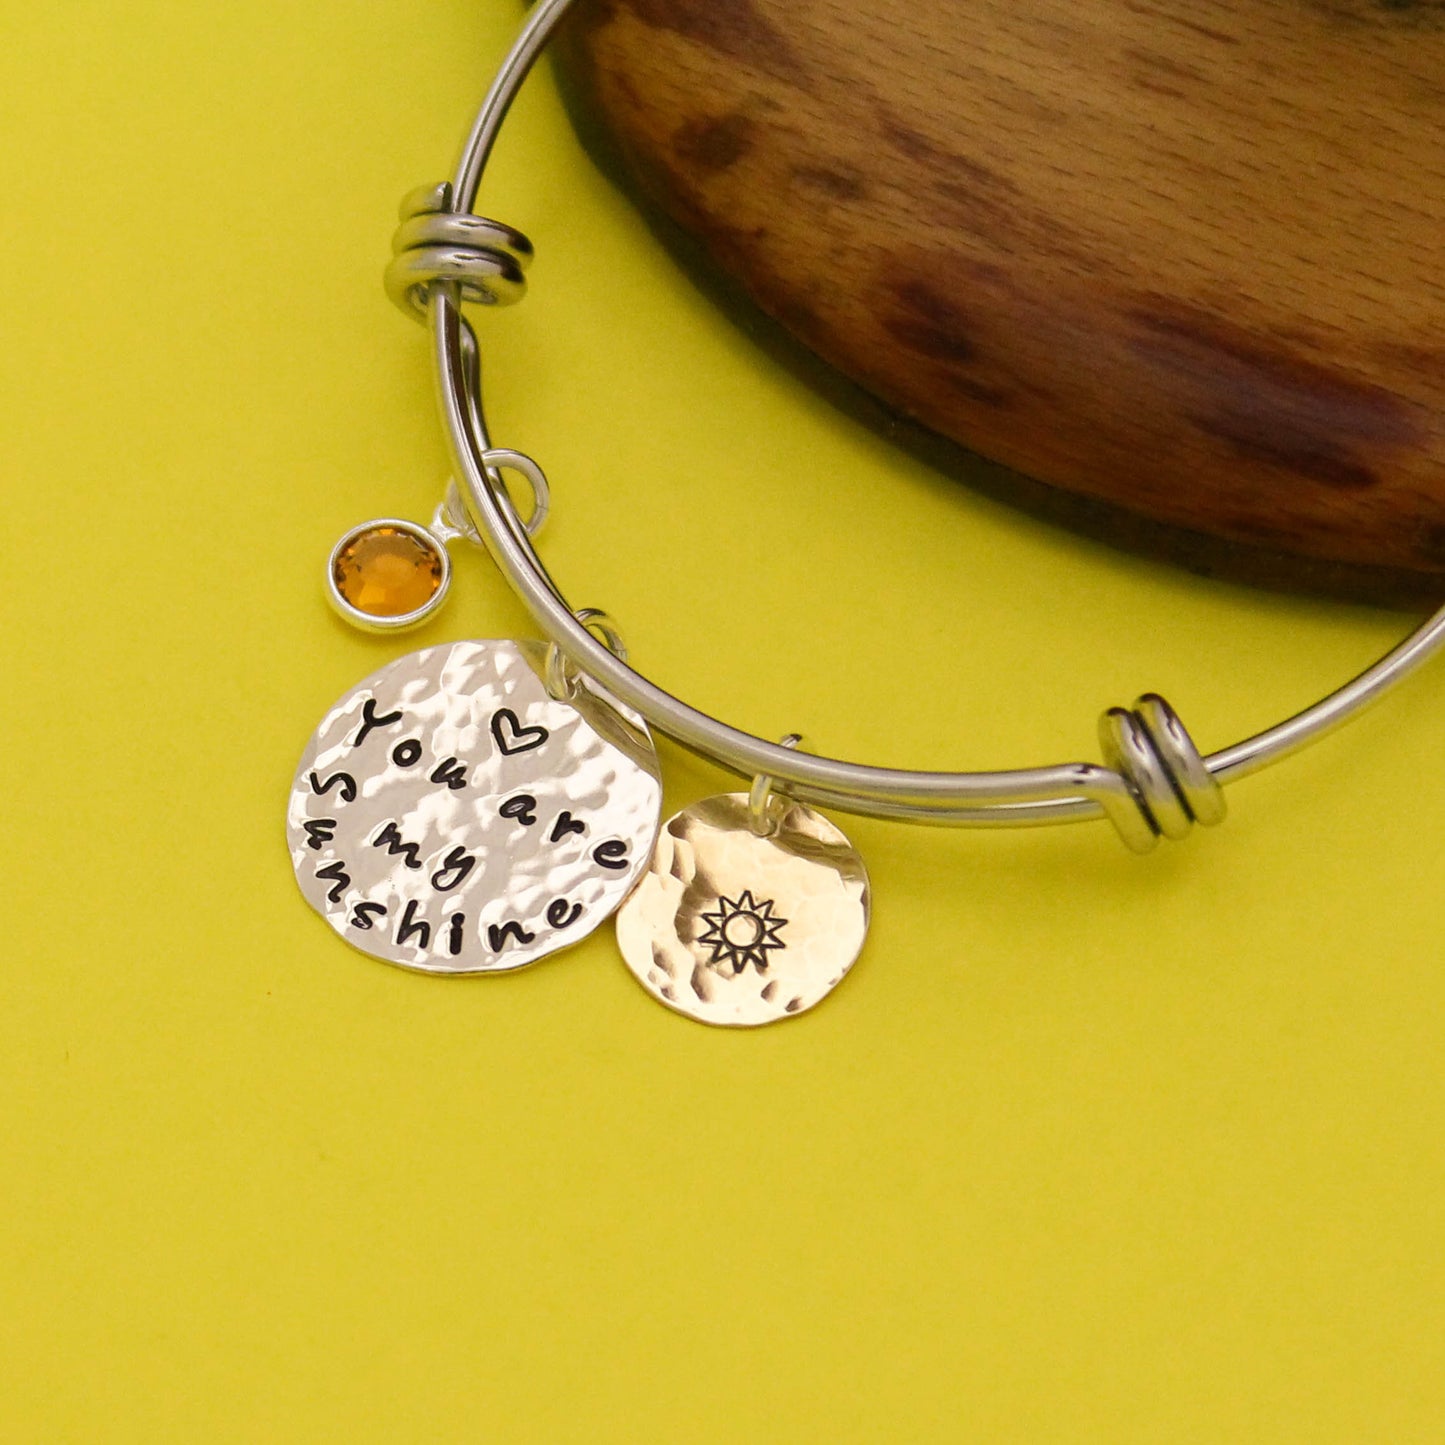 You Are My Sunshine Bangle Bracelet, Sun Jewelry, Mother Bracelet, Grandmother Bracelet, Gifts for Her, Personalized Hand Stamped Jewelry